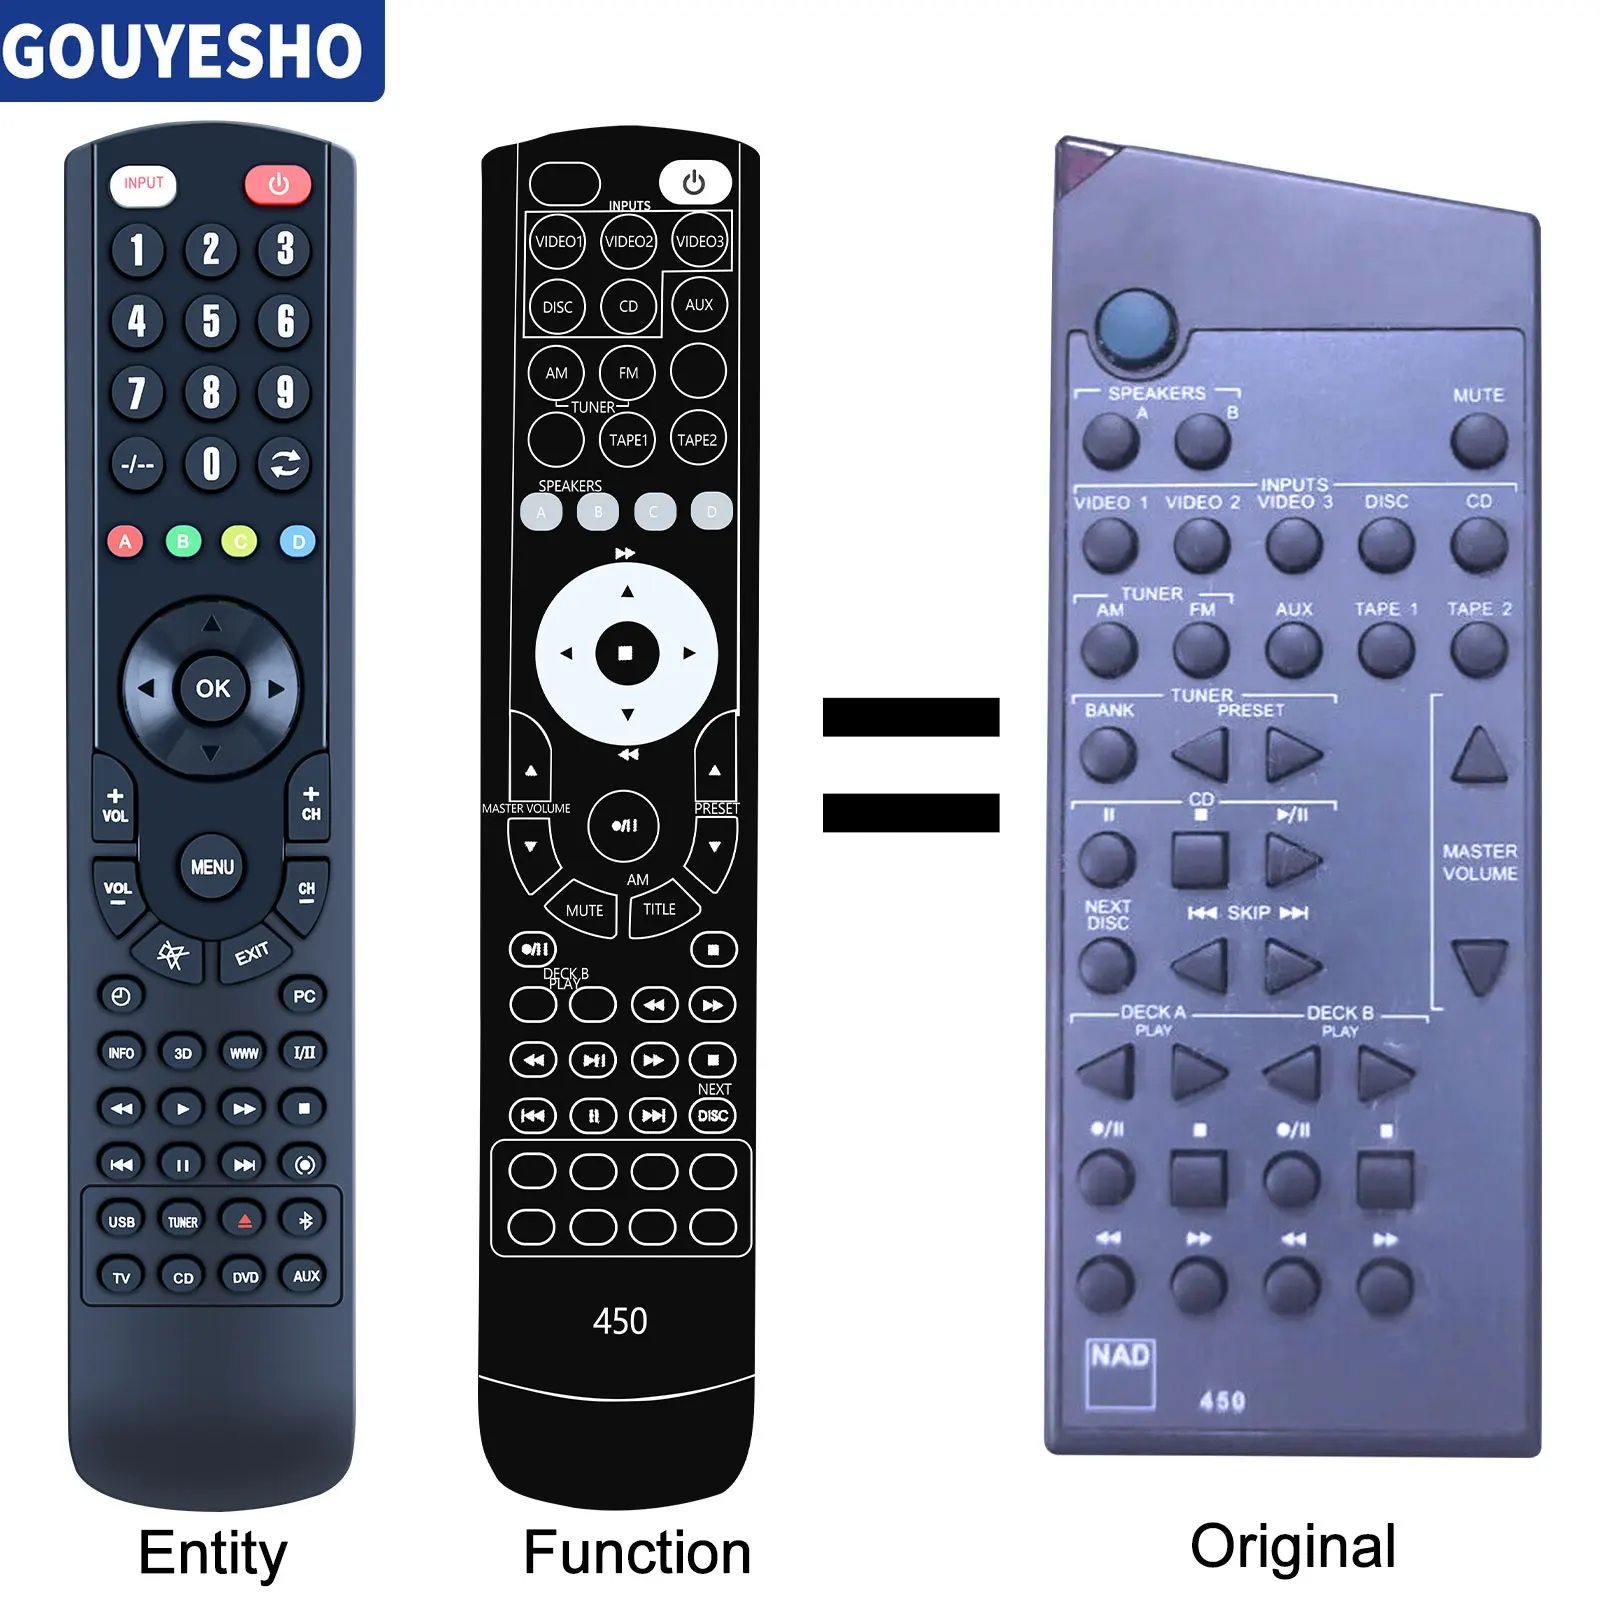 

New Remote Control 450 for NAD C320 / C340/ C350 /C370/C450 Grt. condition No.2